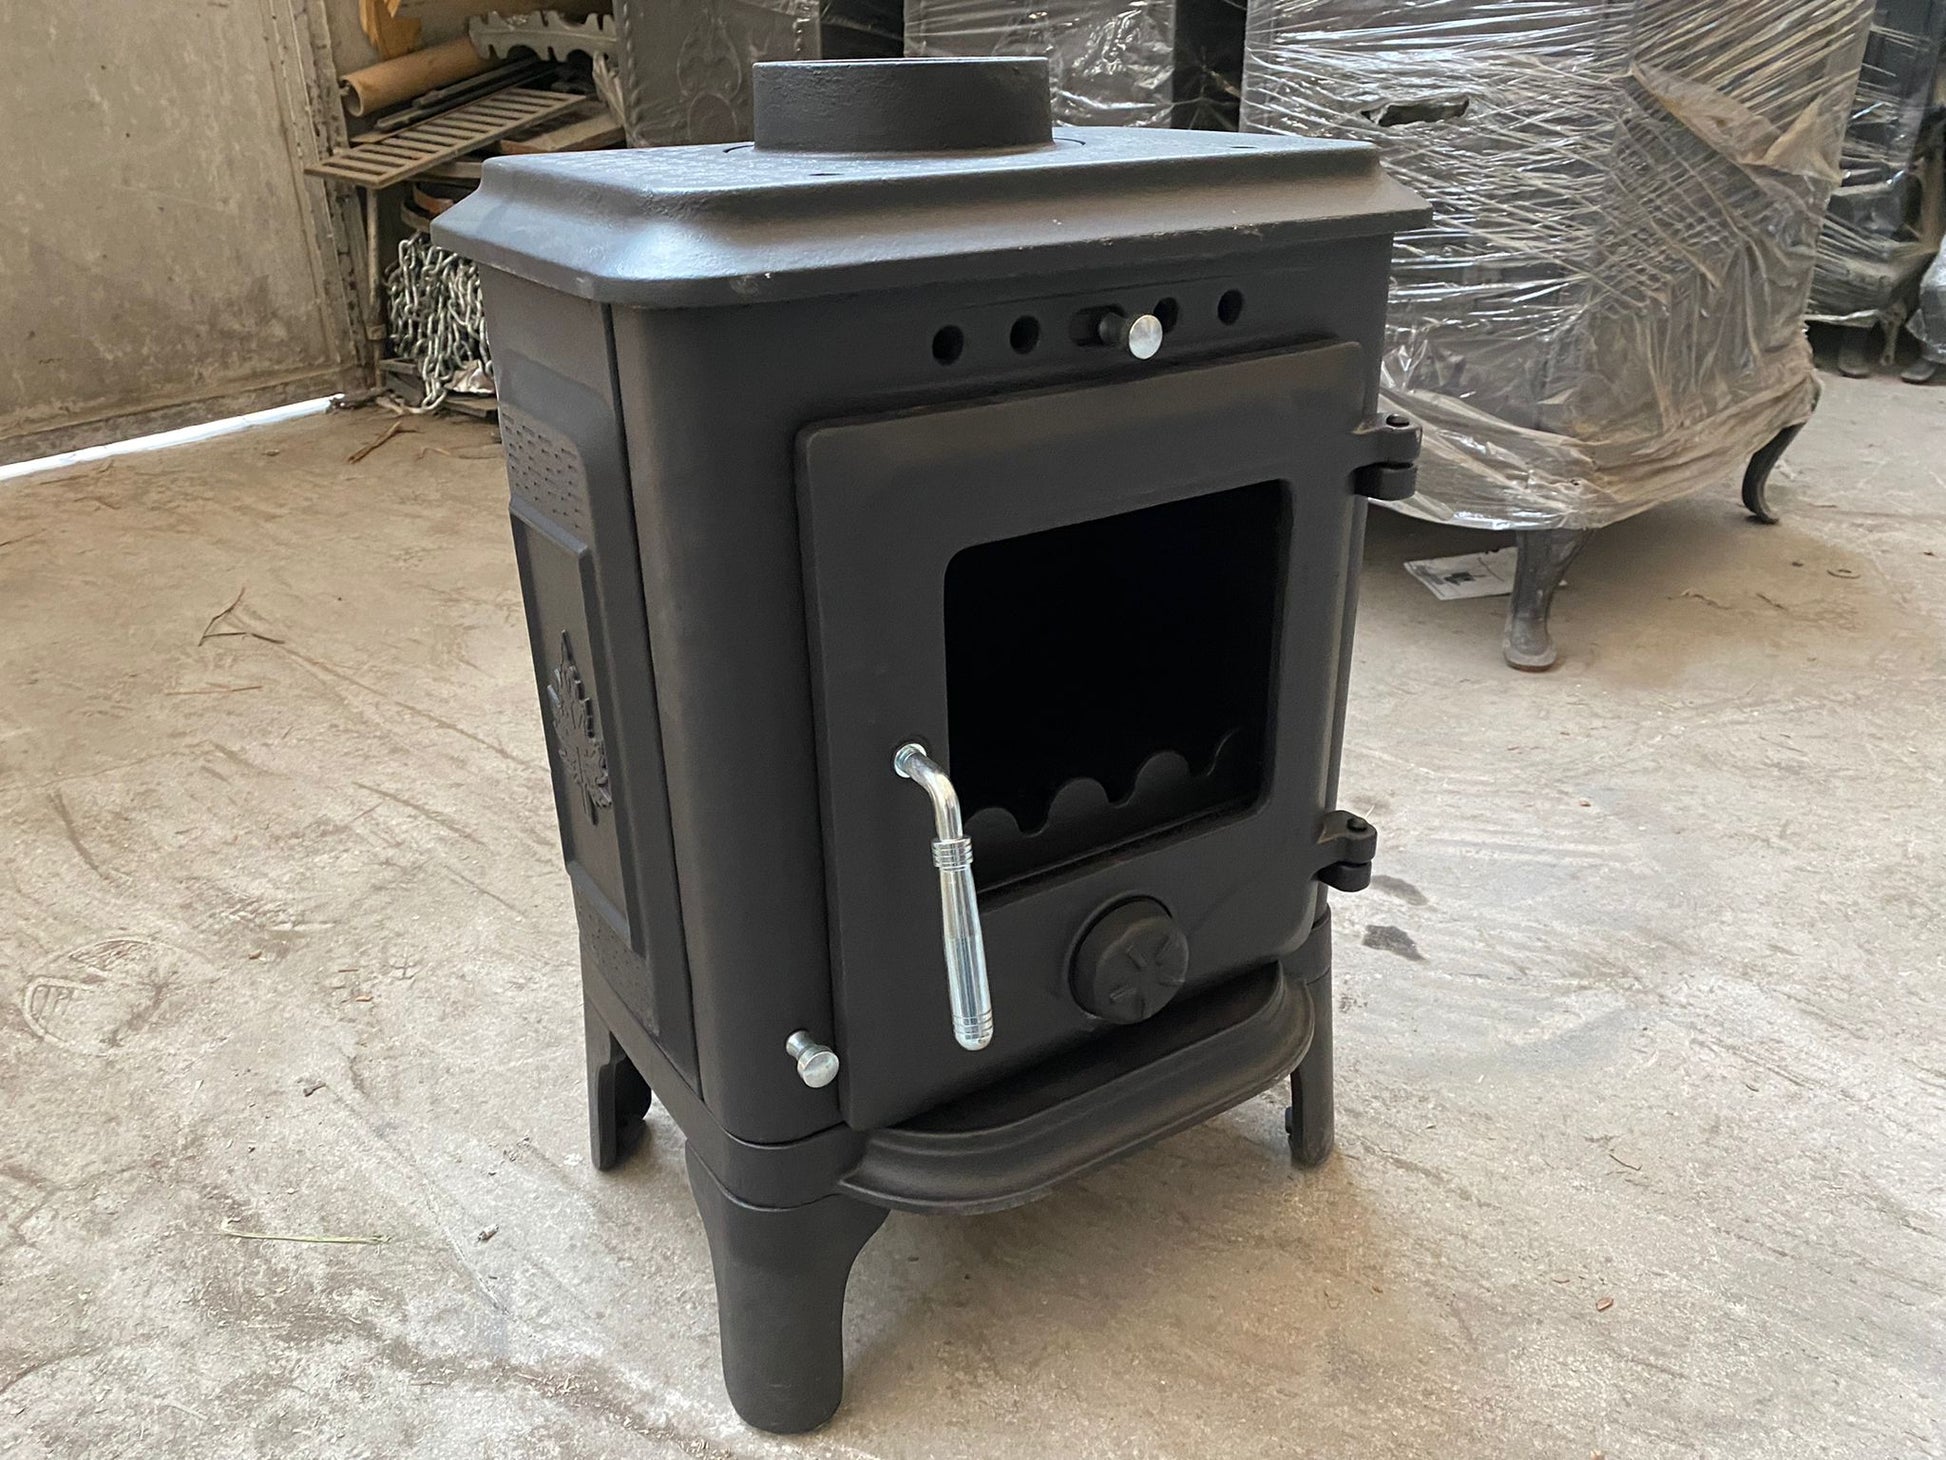 Cast iron stove with oven, wood burning stove, fireplace, cooker stove